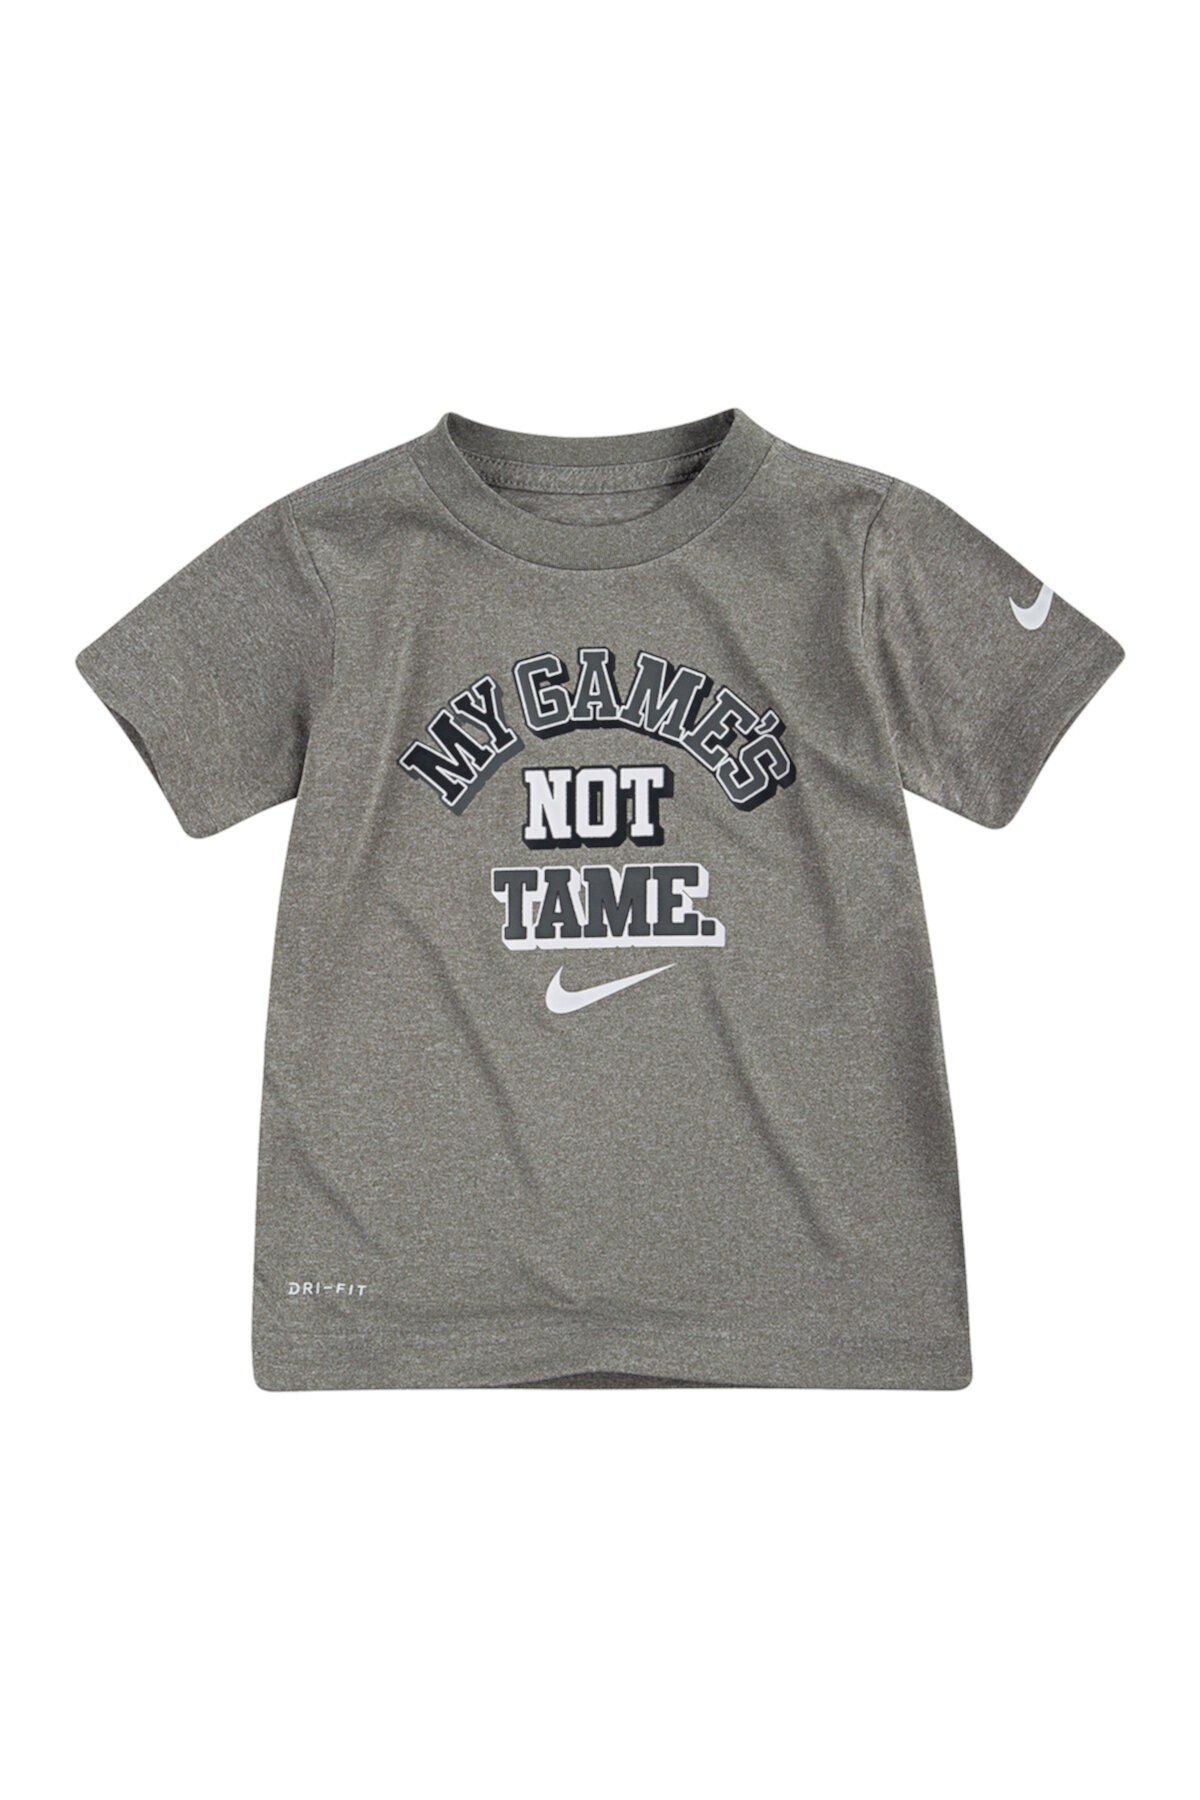 My Games Not Tame Shirt (Little Boys) Nike